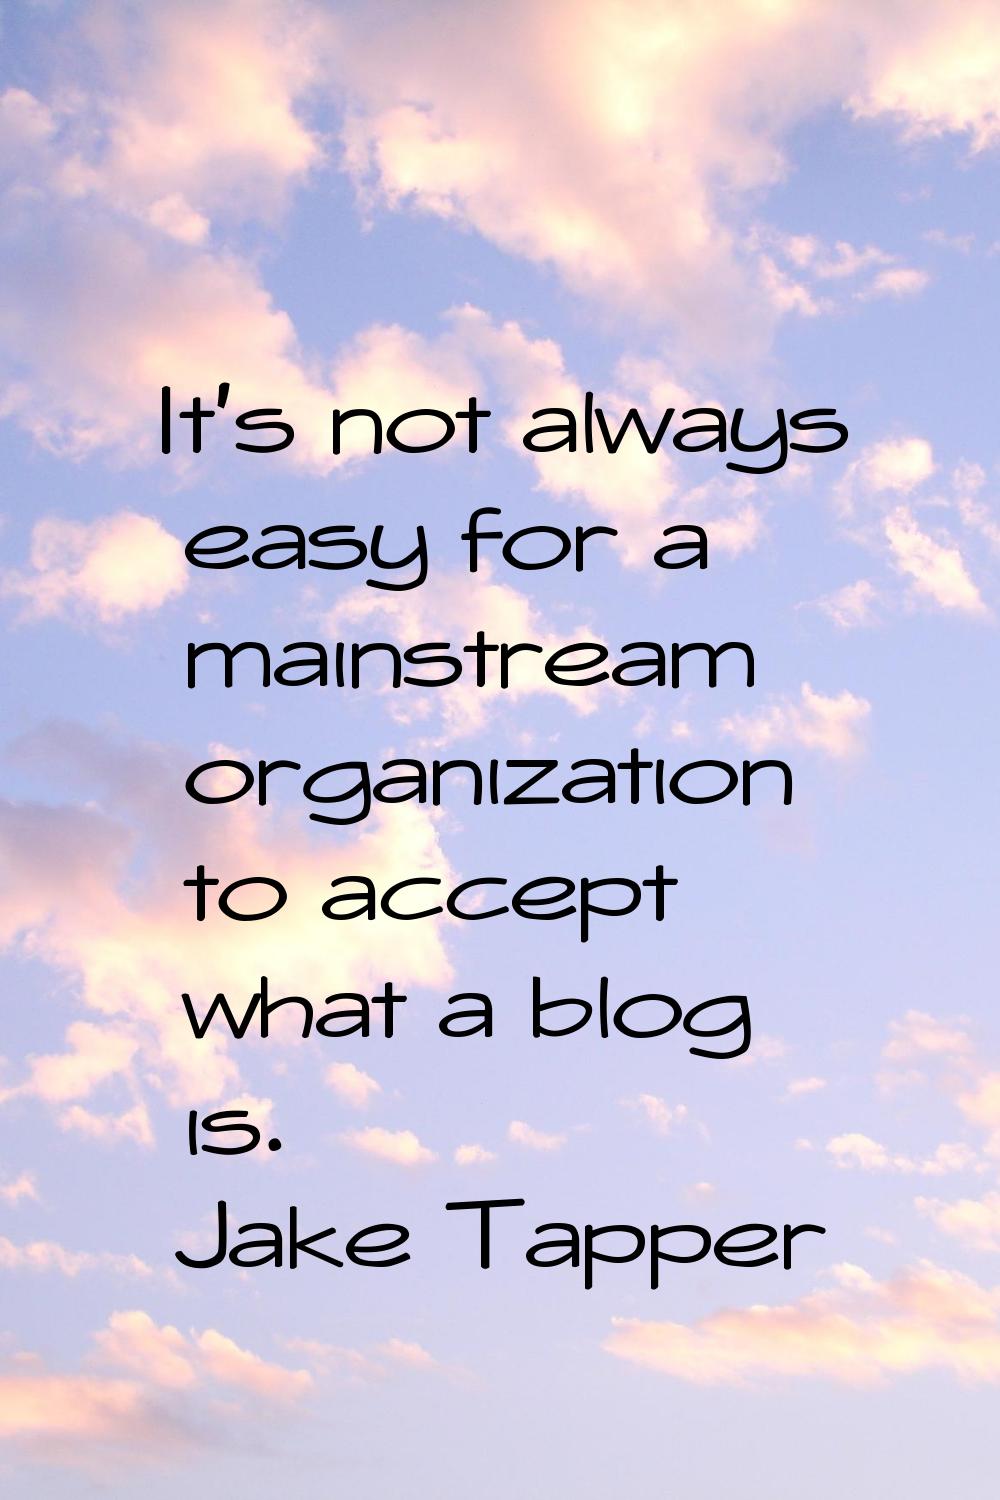 It's not always easy for a mainstream organization to accept what a blog is.